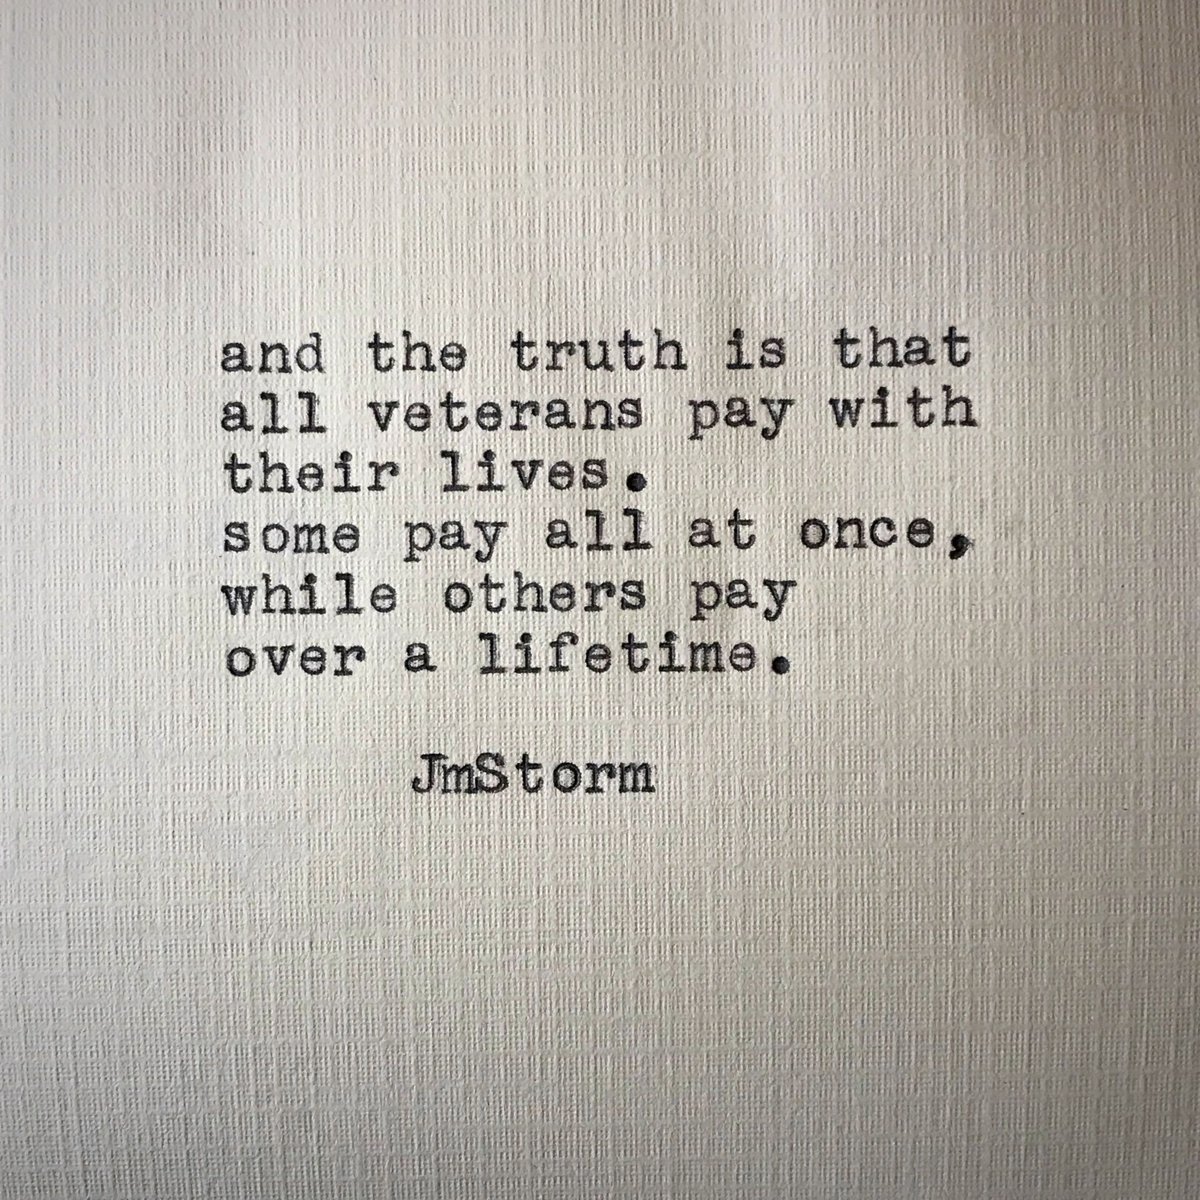 And the truth is that all veterans pay with their lives. Some pay all at once, while others pay over a lifetime. — J.M. Storm. #CharlieMike #BattleBuddies #dogs #dogrescue #Horses #veterans #army #navy #airforce #marines #continuethemission